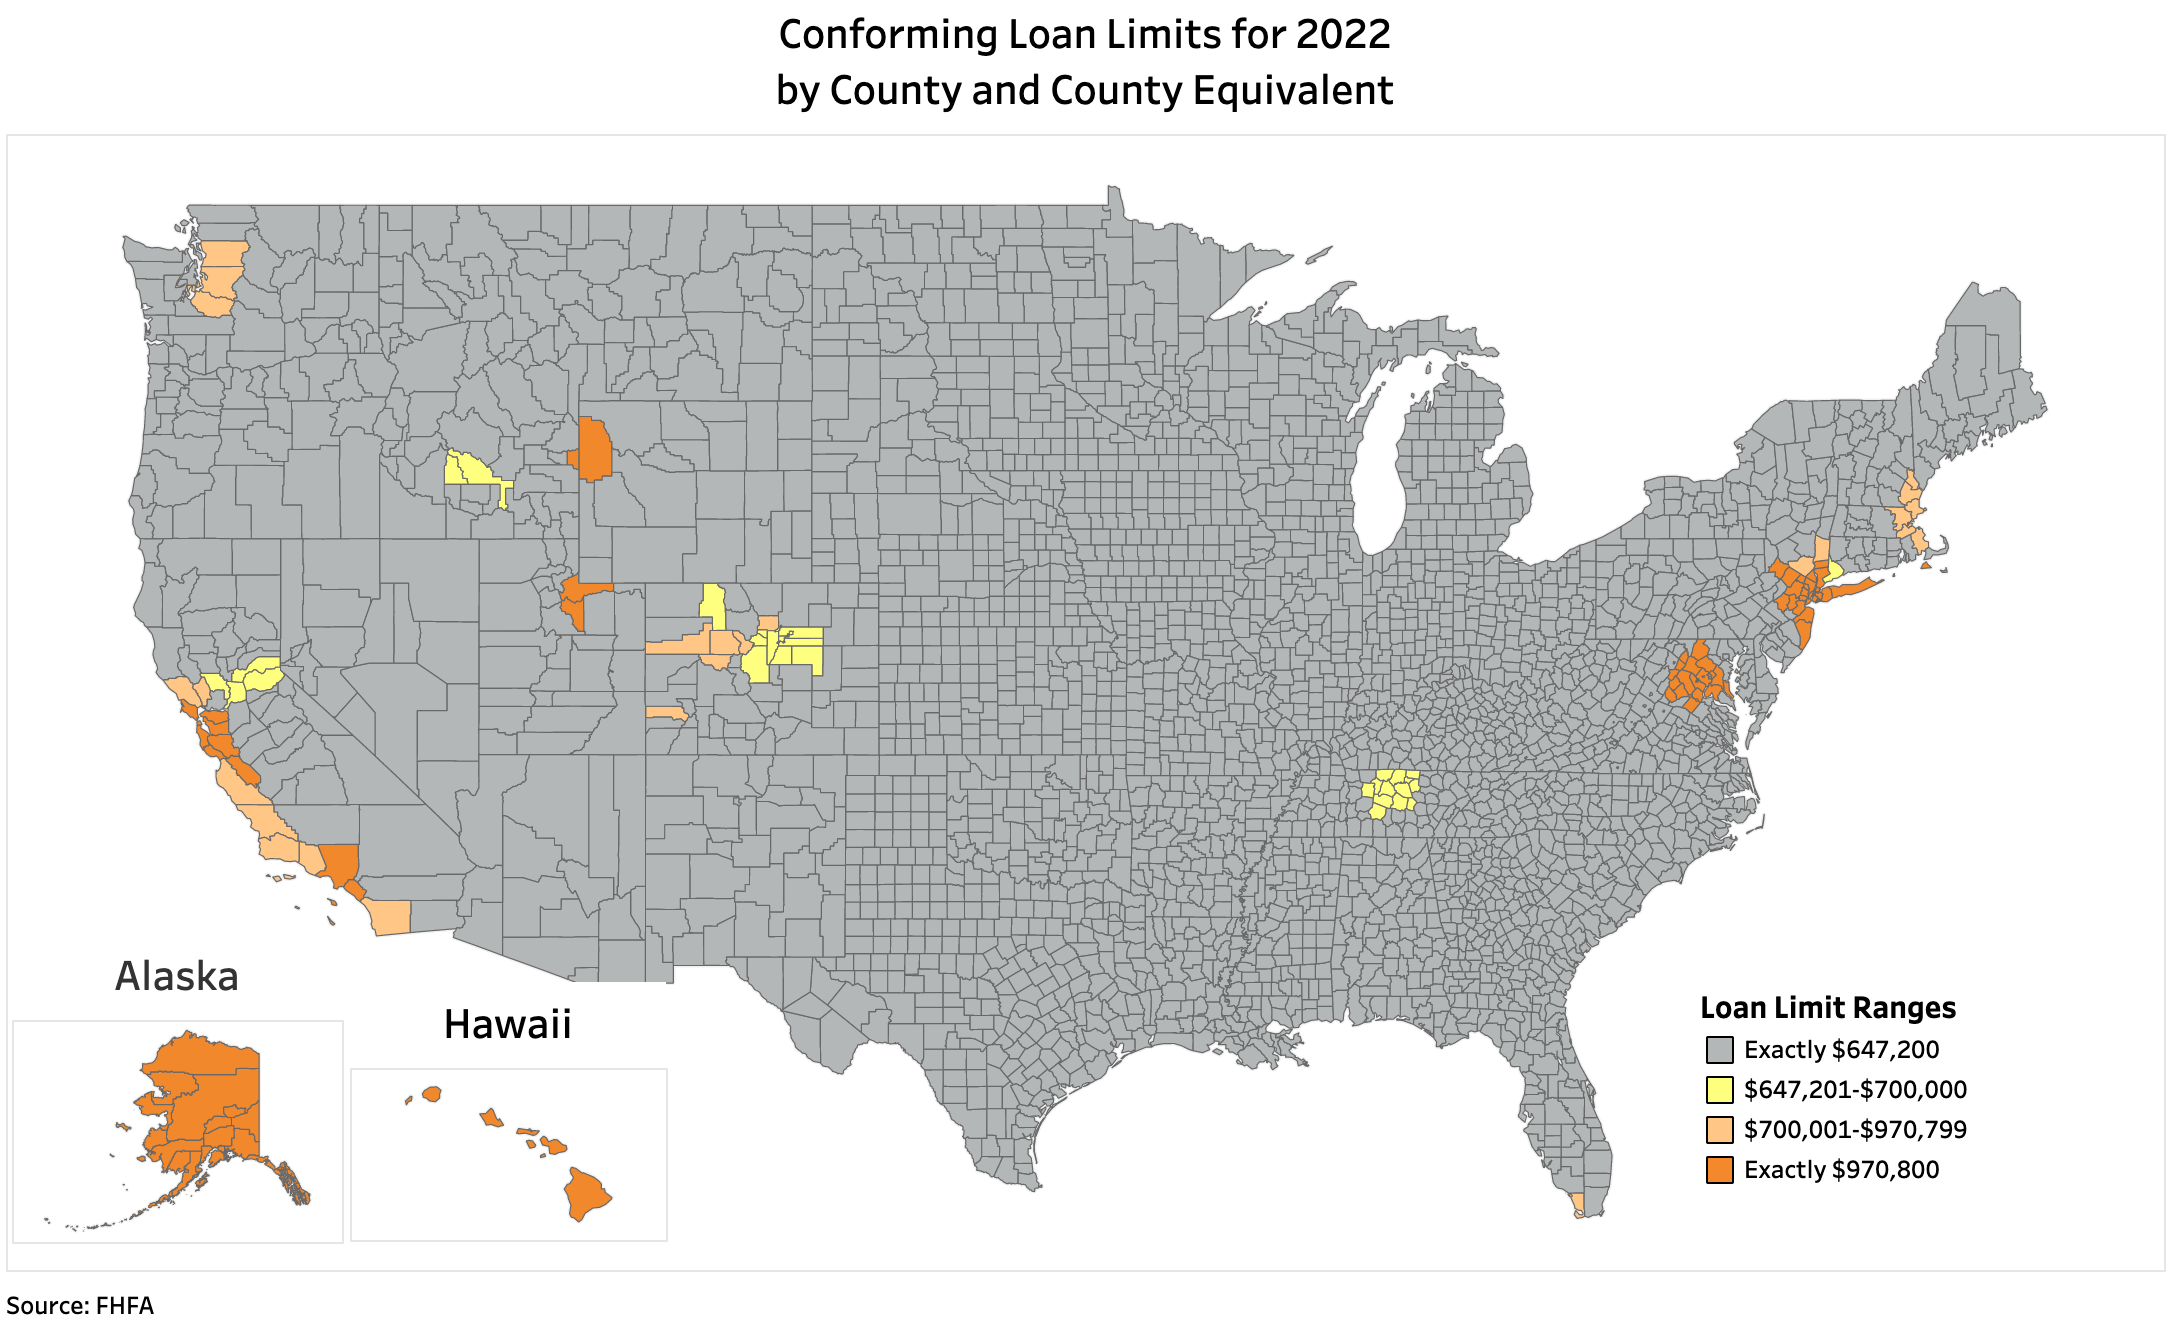 A map of the U.S. showing conforming loan limits for 2022 by county across the country.